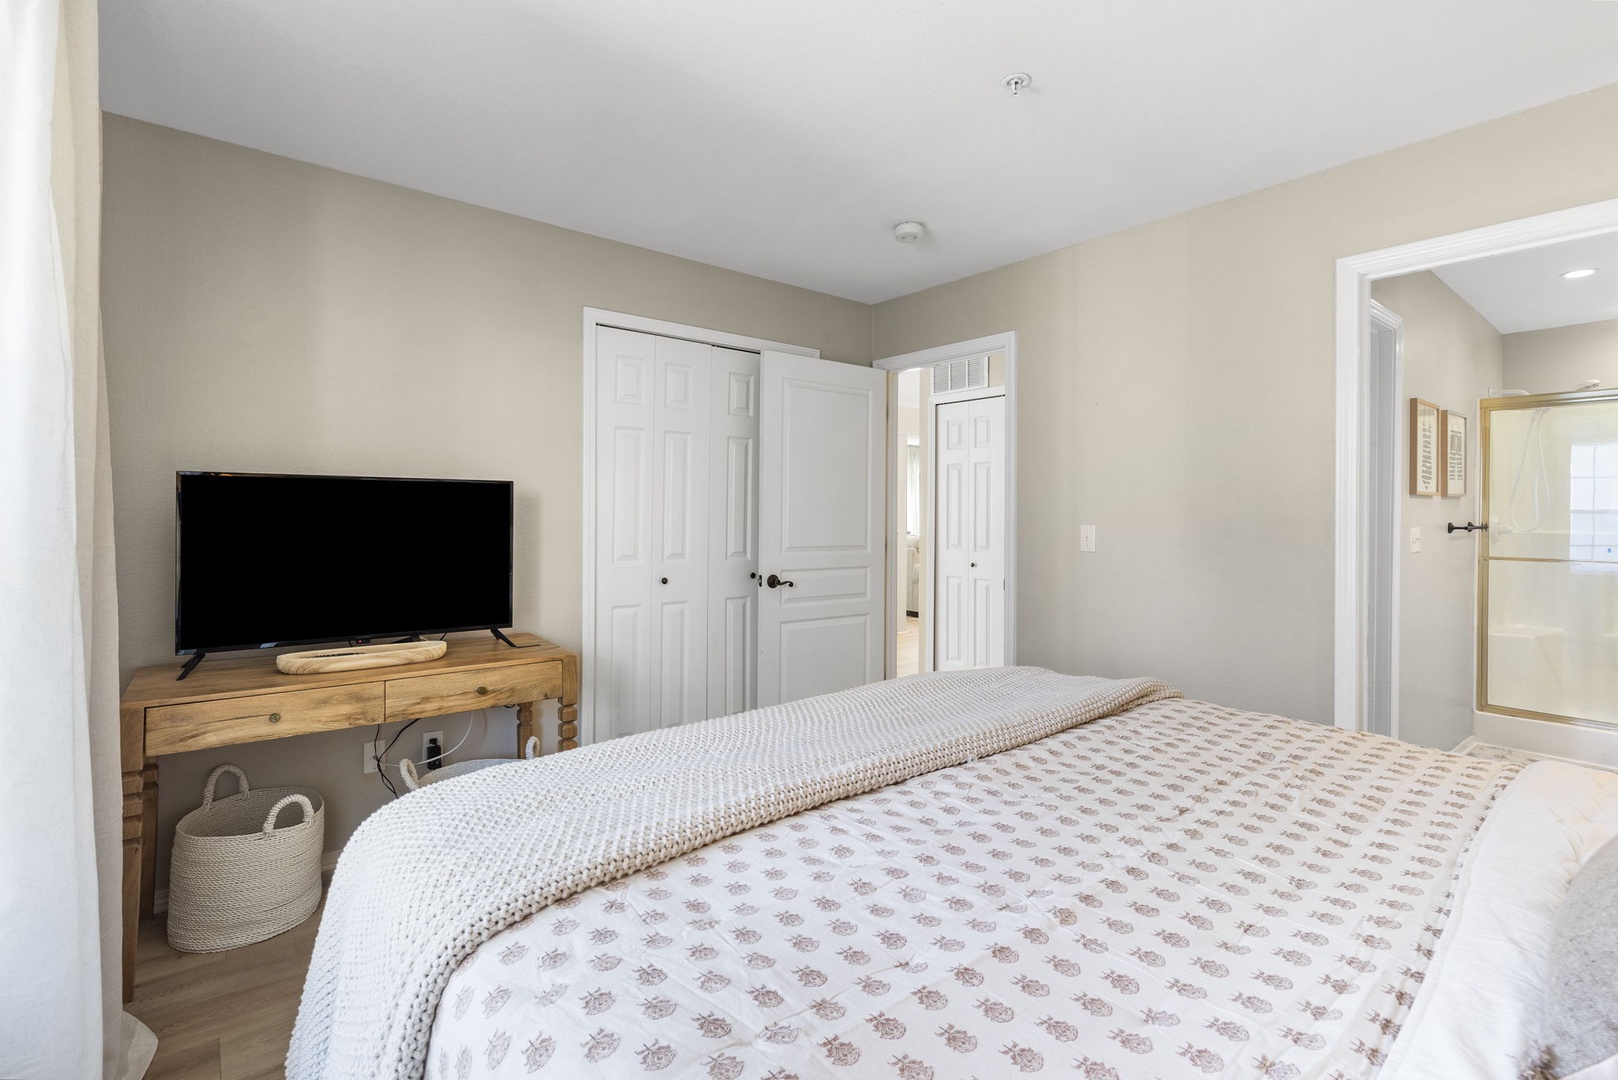 The second king bedroom offers guests a TV & private en suite bathroom